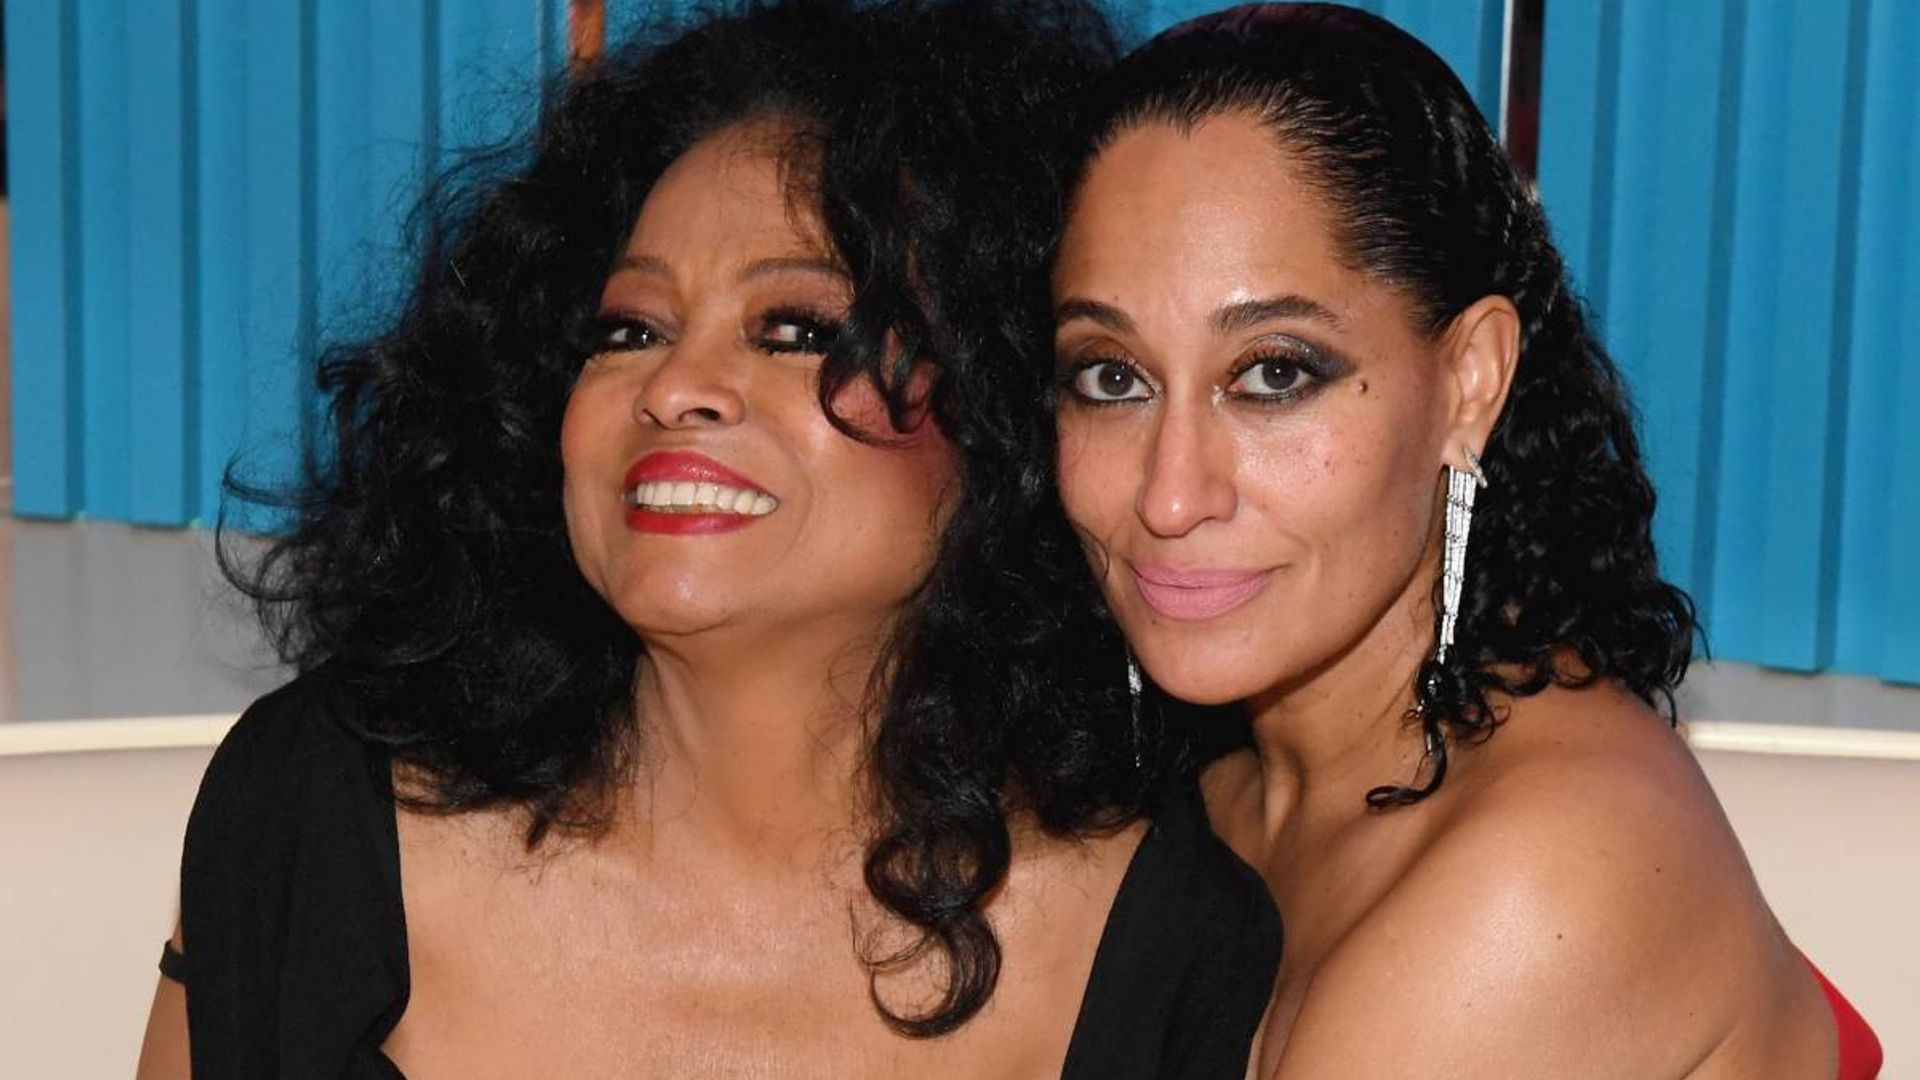 Diana Ross puts on flirty display in rare appearance on daughter Tracee Ellis Ross' Instagram